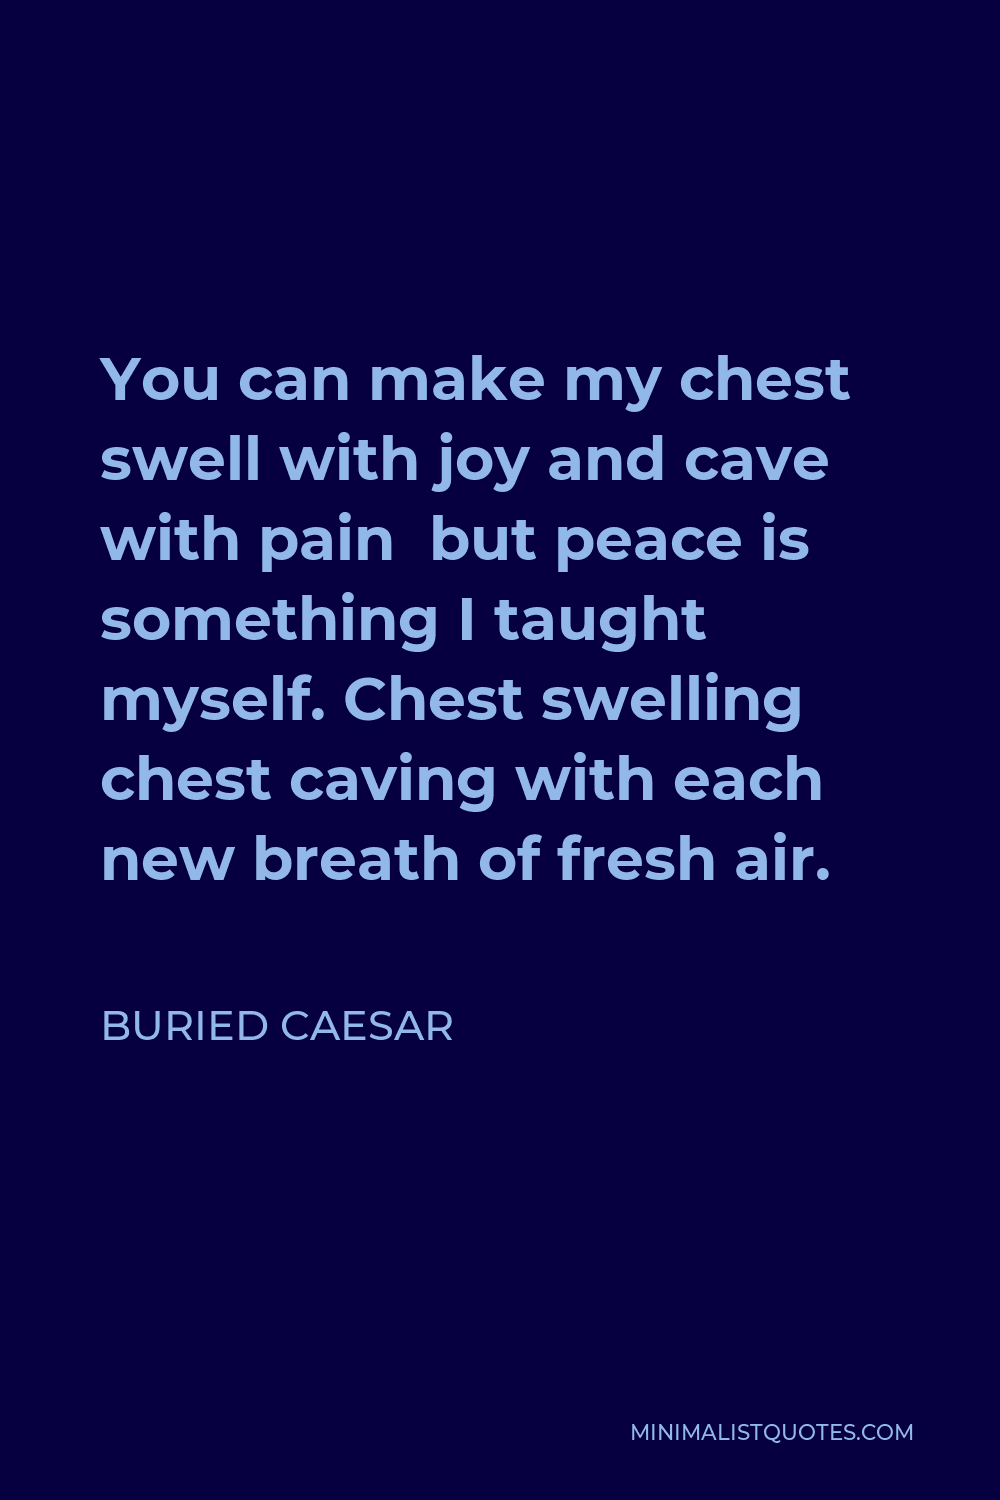 Buried Caesar Quote - You can make my chest swell with joy and cave with pain but peace is something I taught myself. Chest swelling chest caving with each new breath of fresh air.